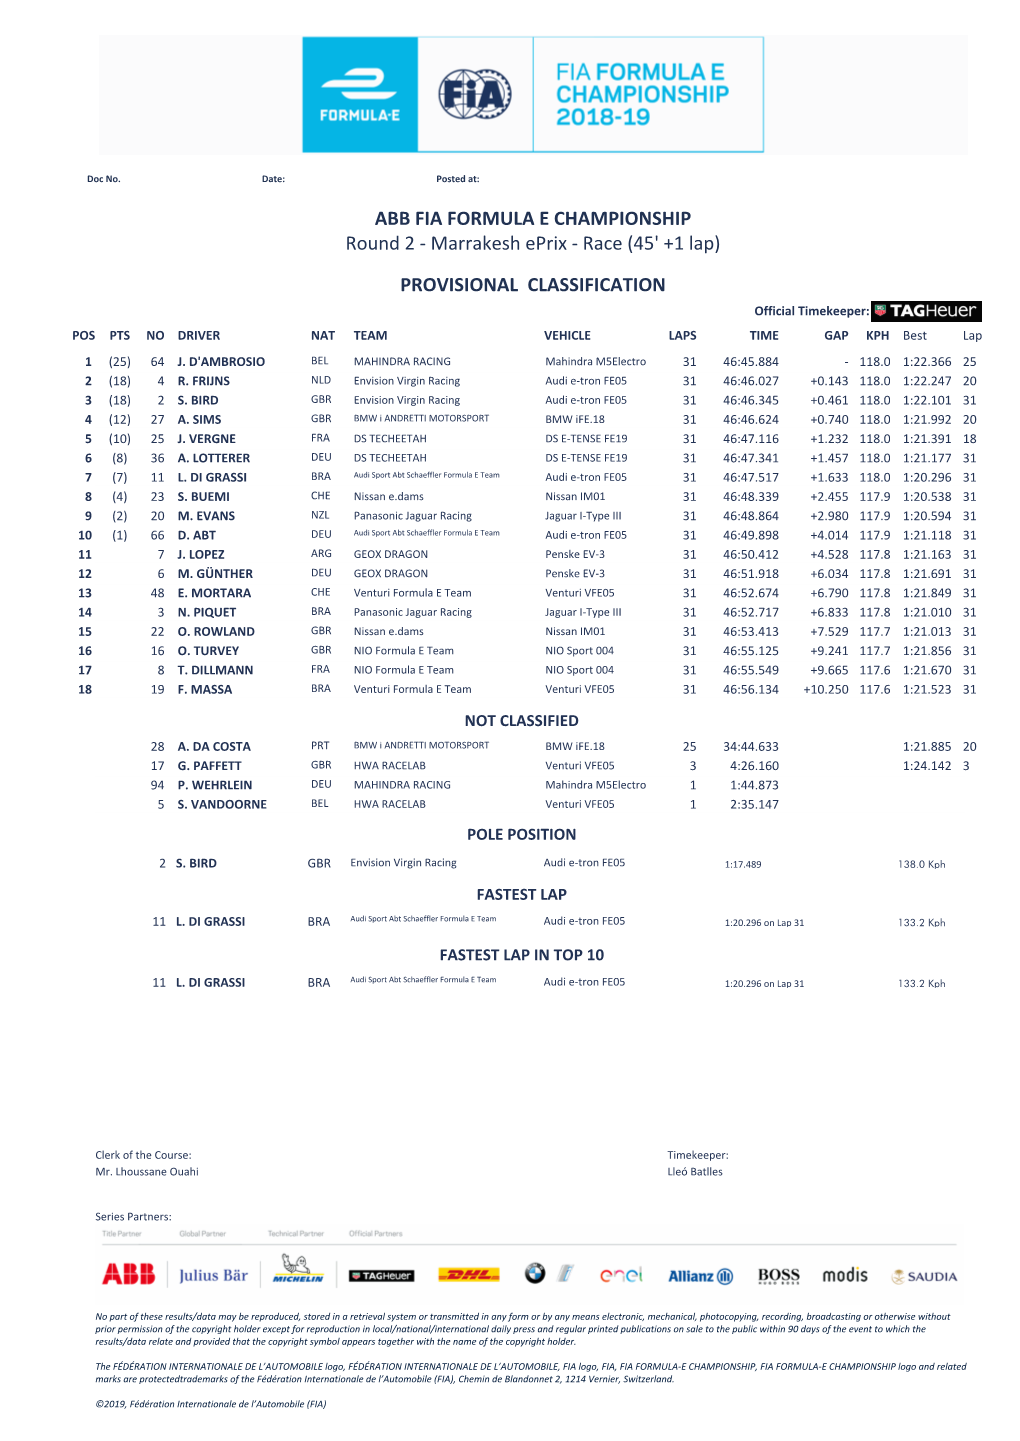 PROVISIONAL CLASSIFICATION Round 2